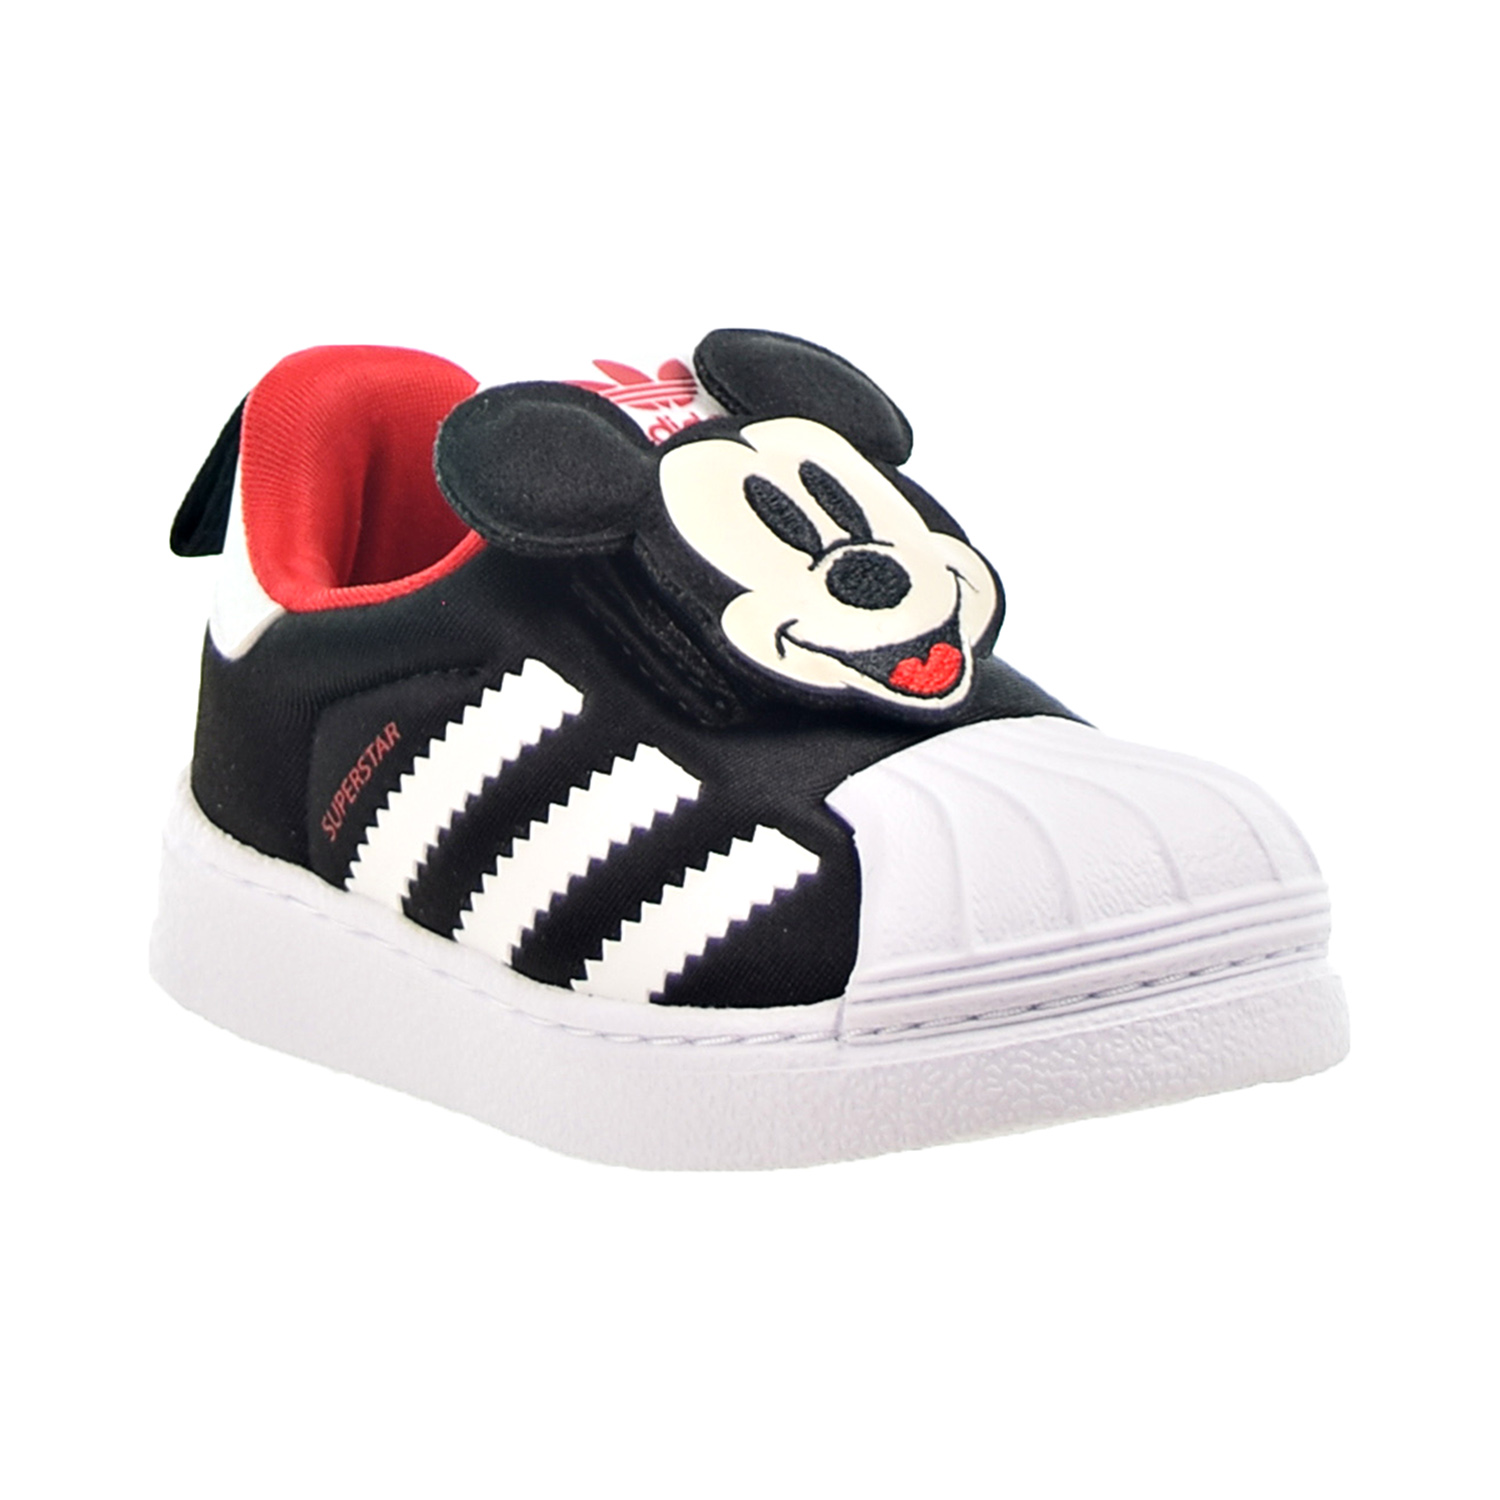 sudden Founder Badly Adidas X Disney Superstar 360 I "Mickey Mouse" Toddlers' Shoes  Black-White-Red q46305